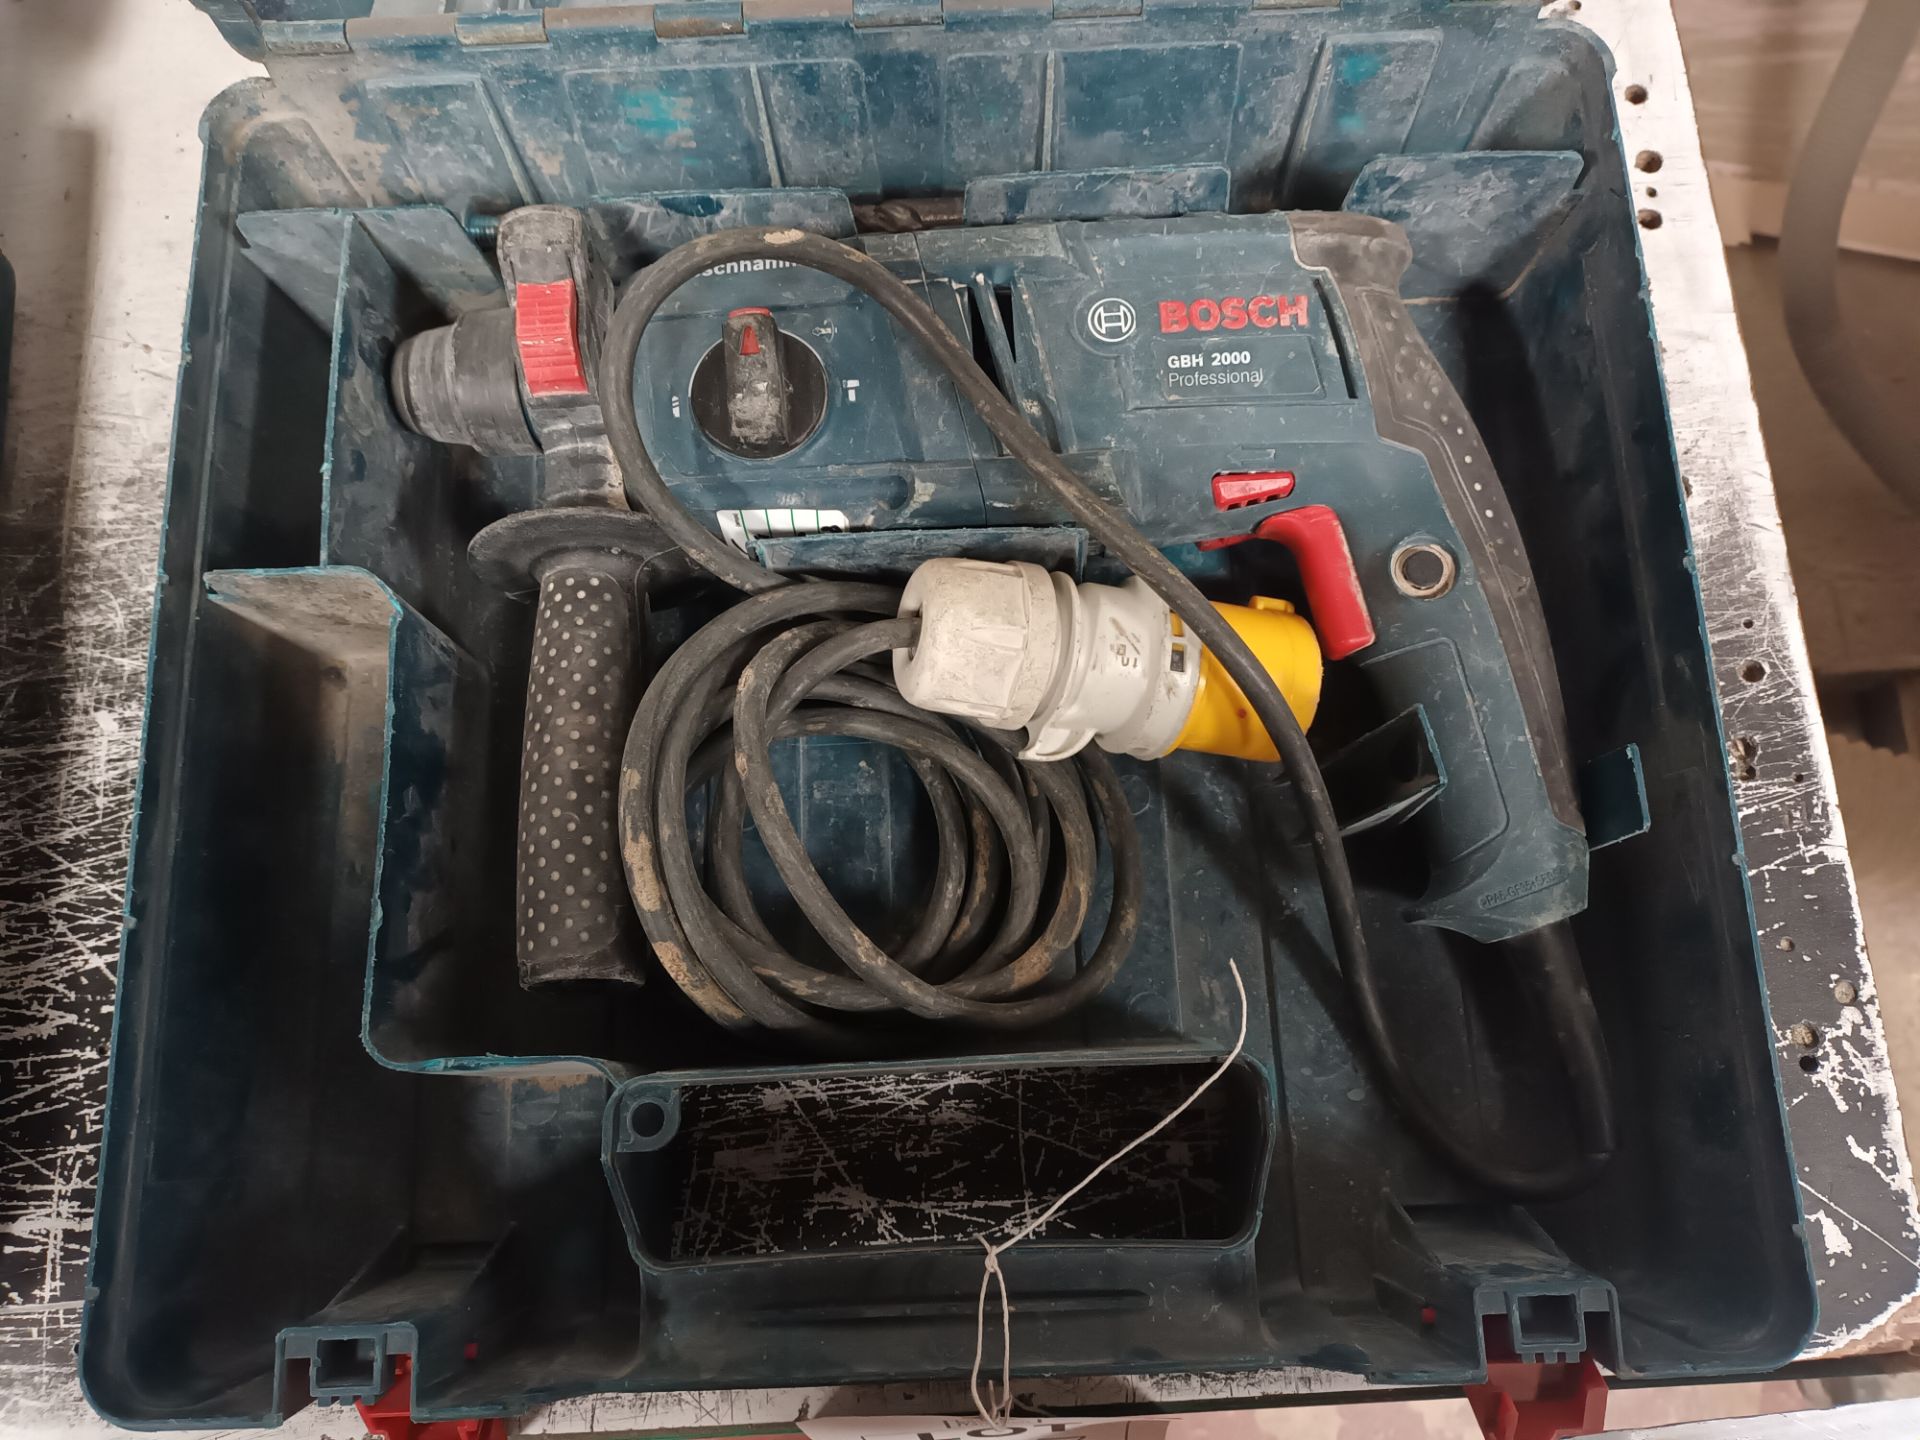 Bosch GBH2000 rotary hammer drill with carry case